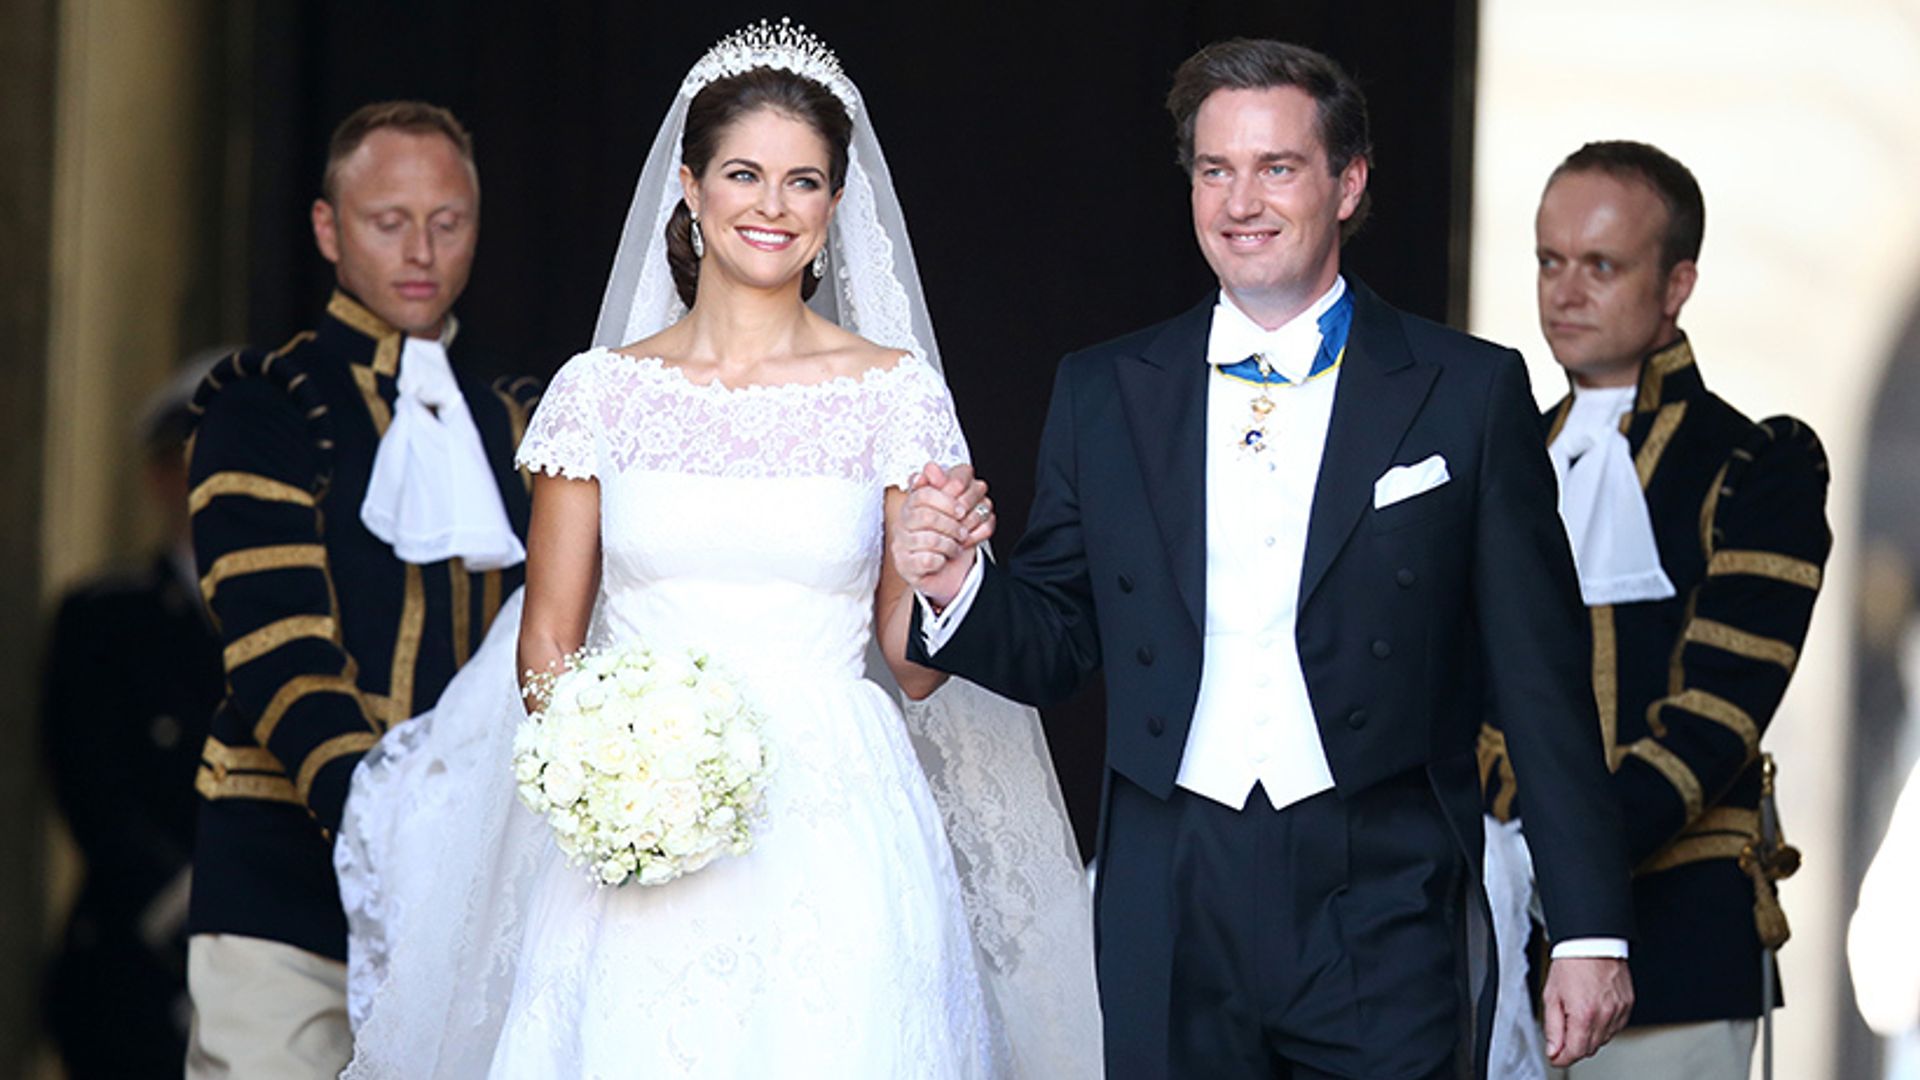 In photos: The wedding of Princess Madeleine of Sweden and Chris O'Neill